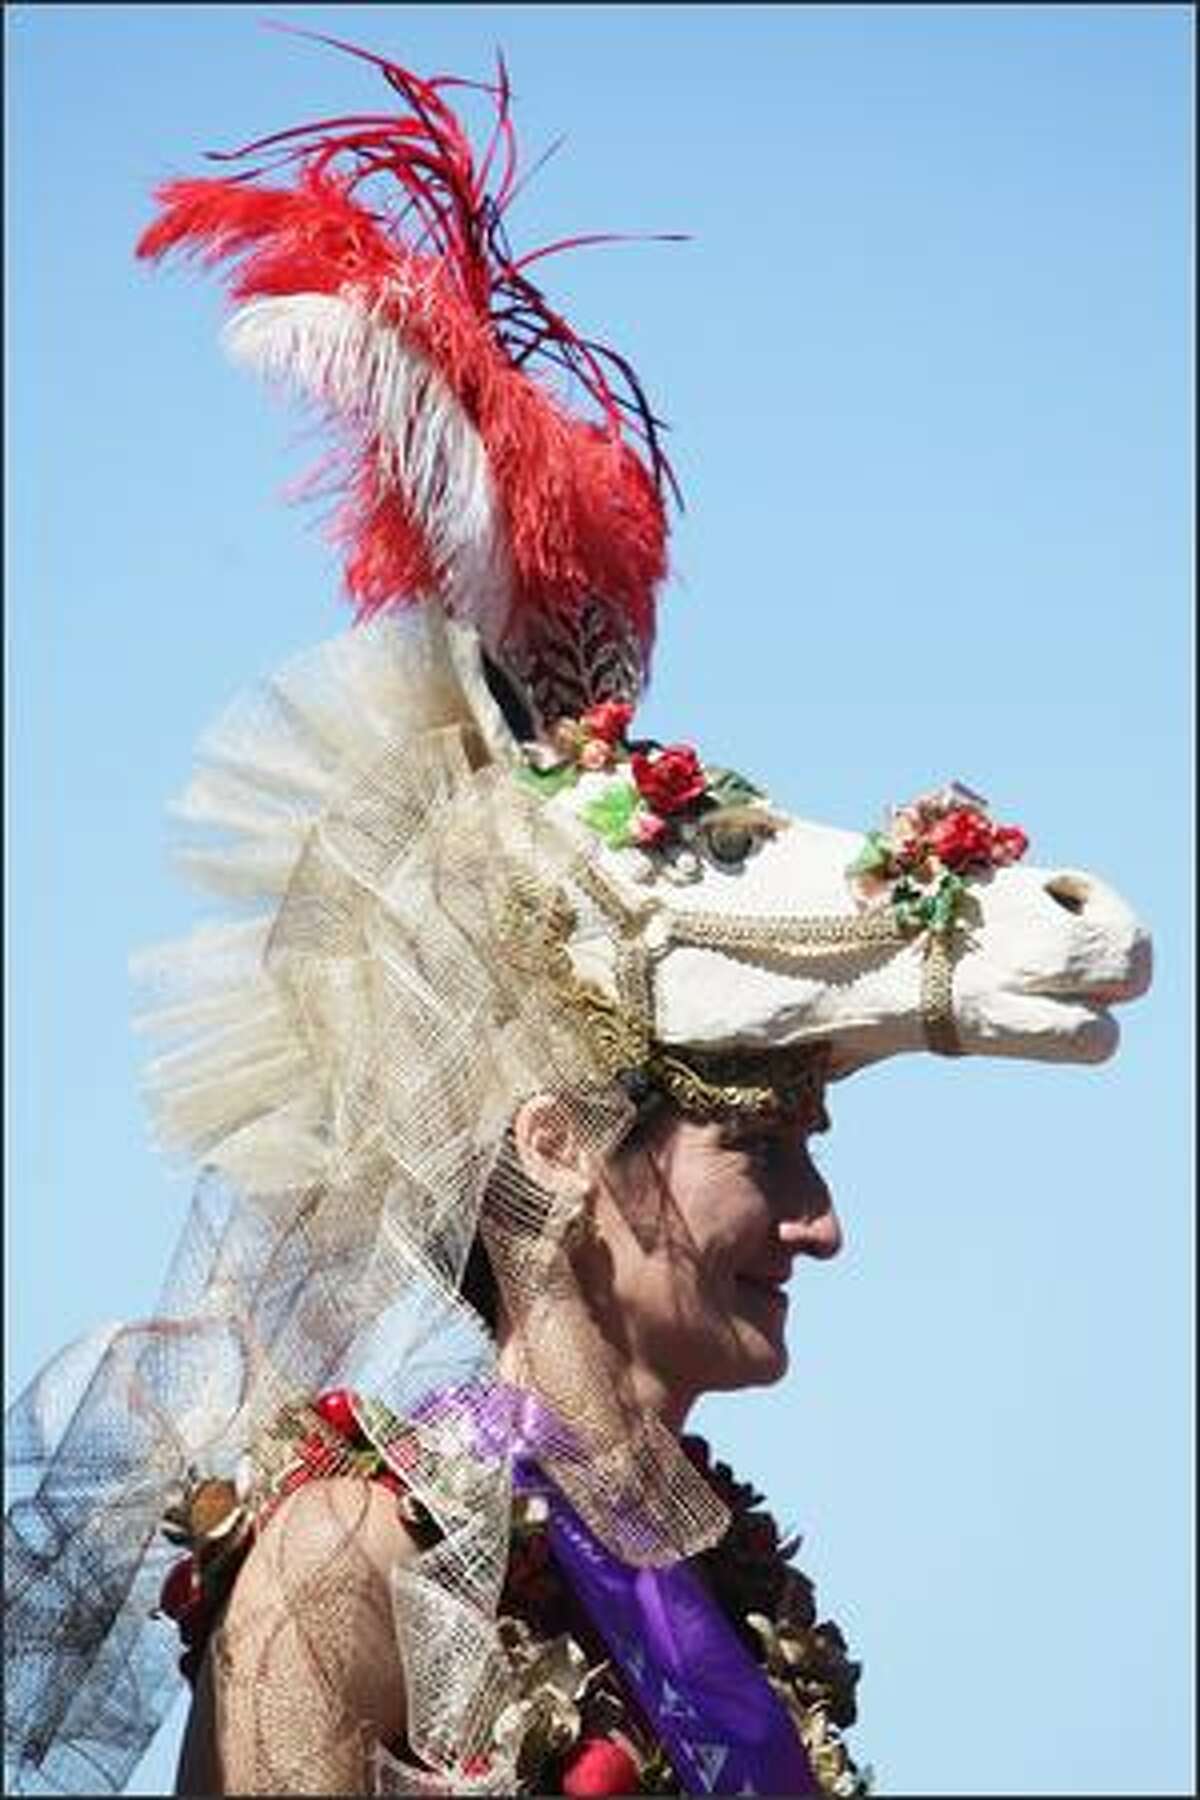 Joelle March displays her head piece during the New Zealand Herald Christmas Carnival meeting at Ellerslie Racecourse on Friday in Auckland, New Zealand.